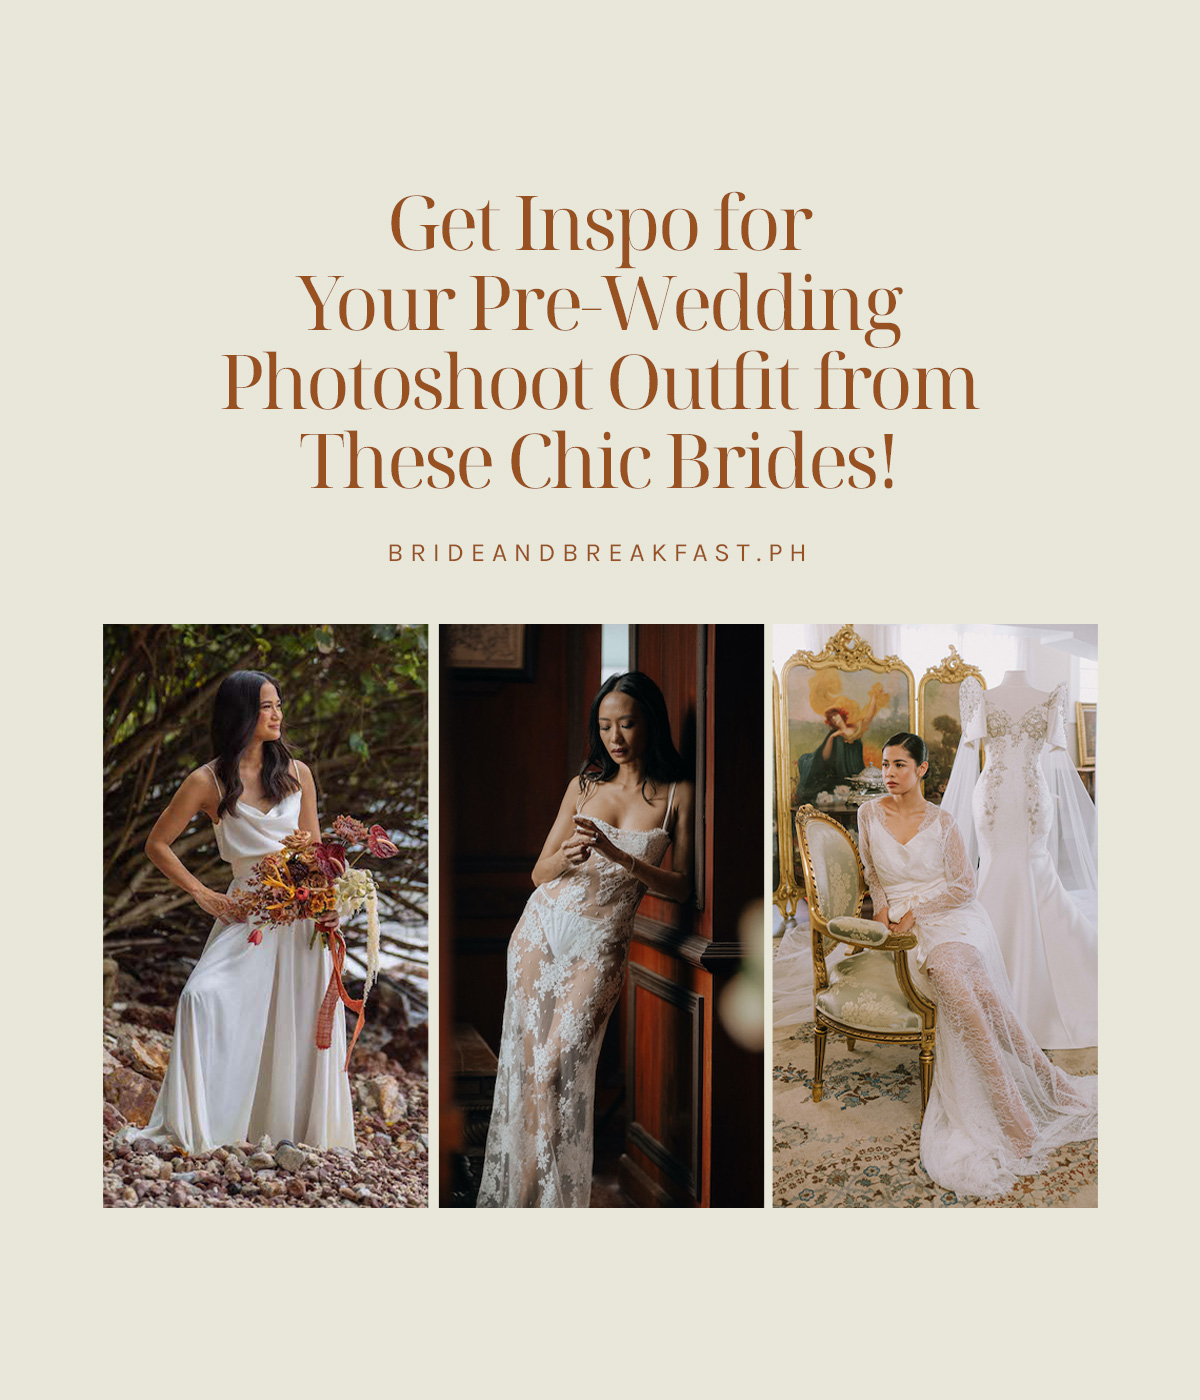 Get Inspo for Your Pre-Wedding Photoshoot Outfit from These Chic Brides!